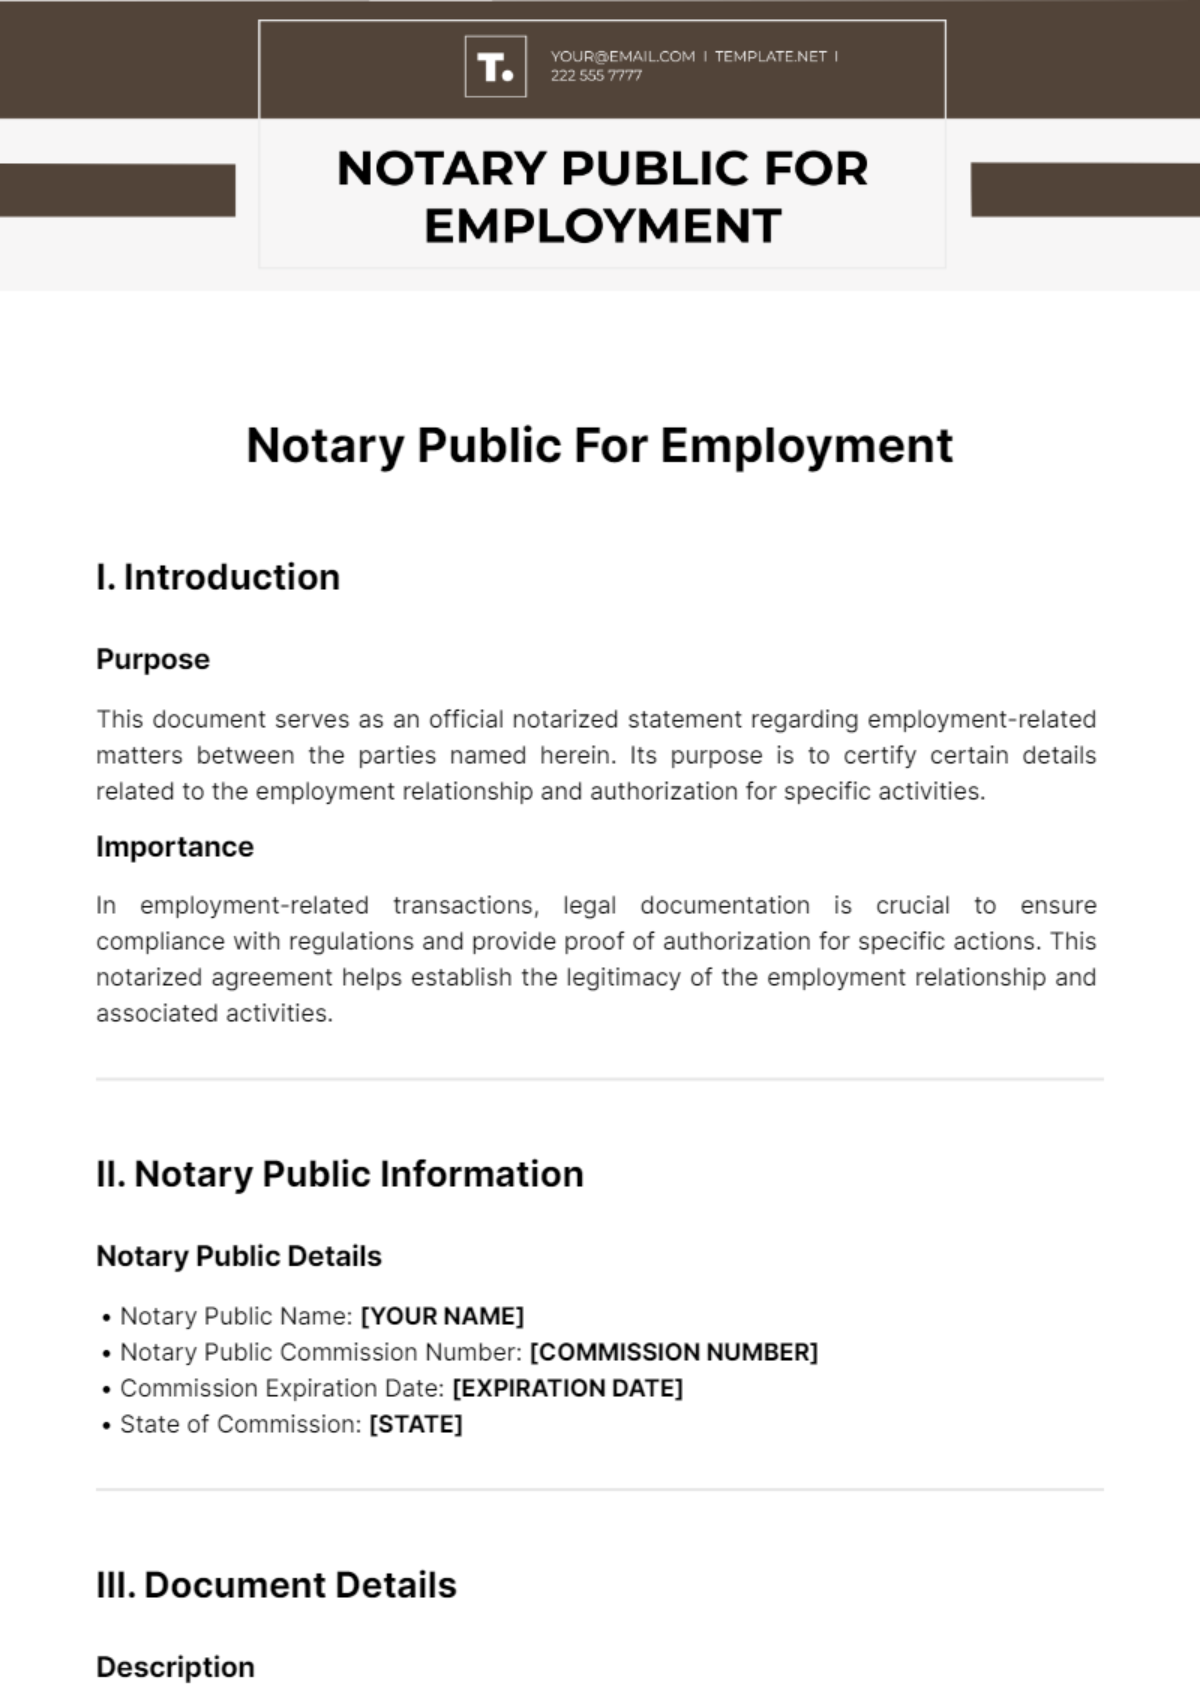 Free Notary Public For Employment Template